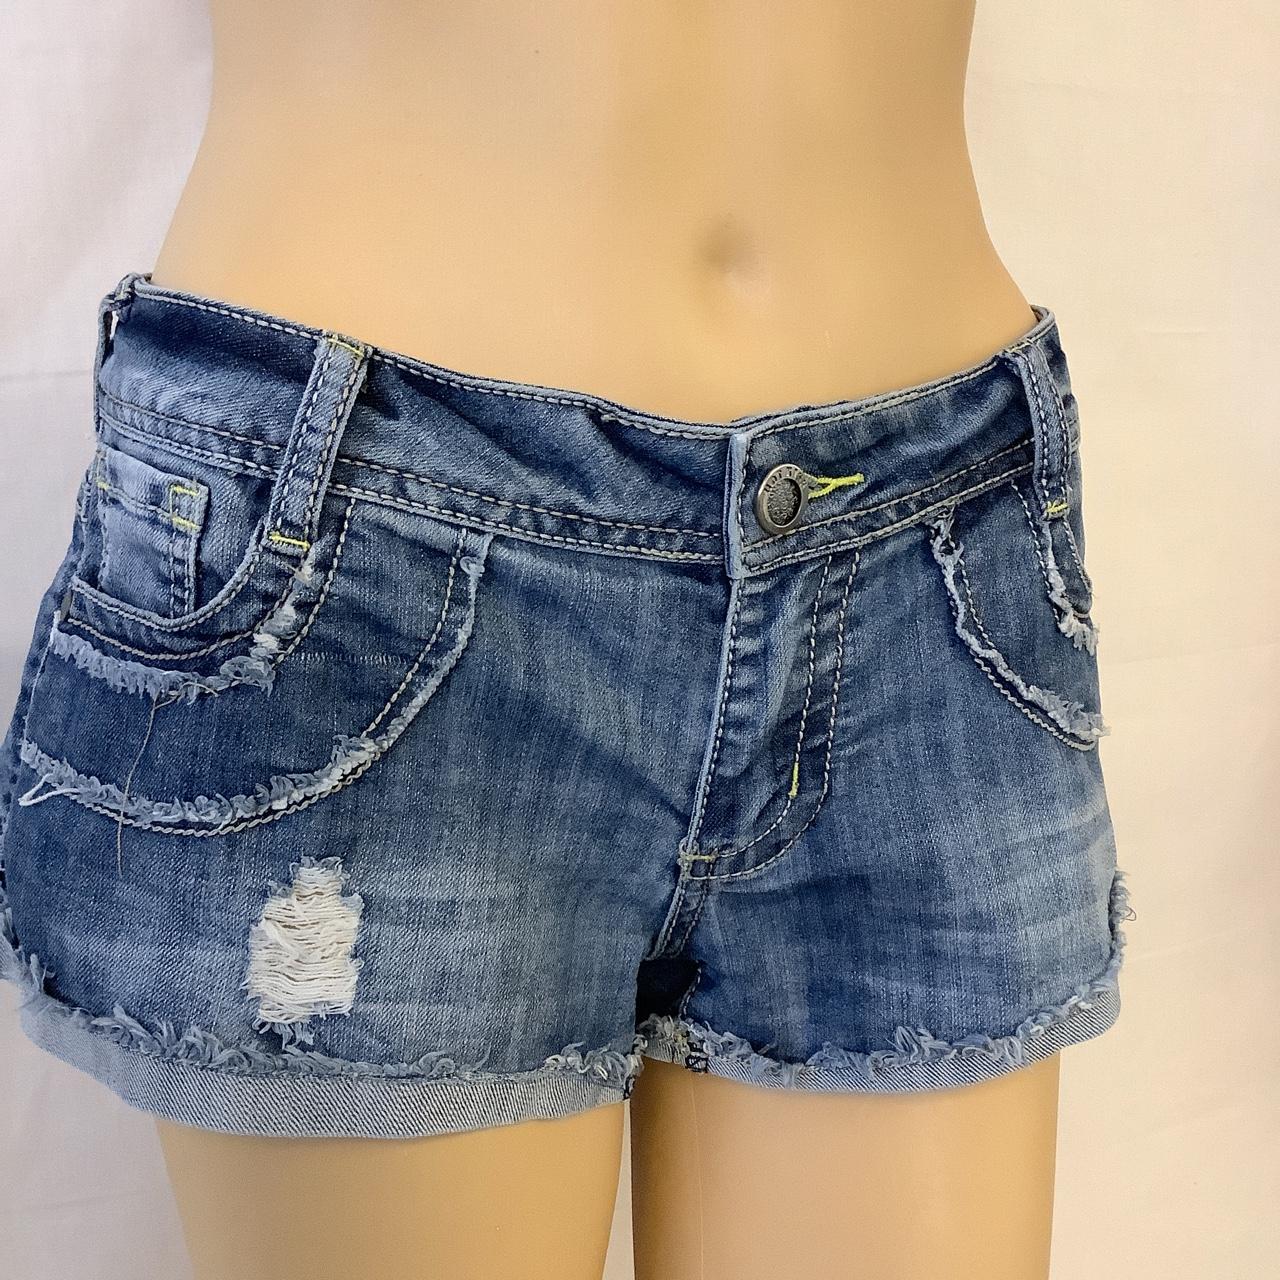 Y2K low cut shorts hotpants with stitched detail to... - Depop